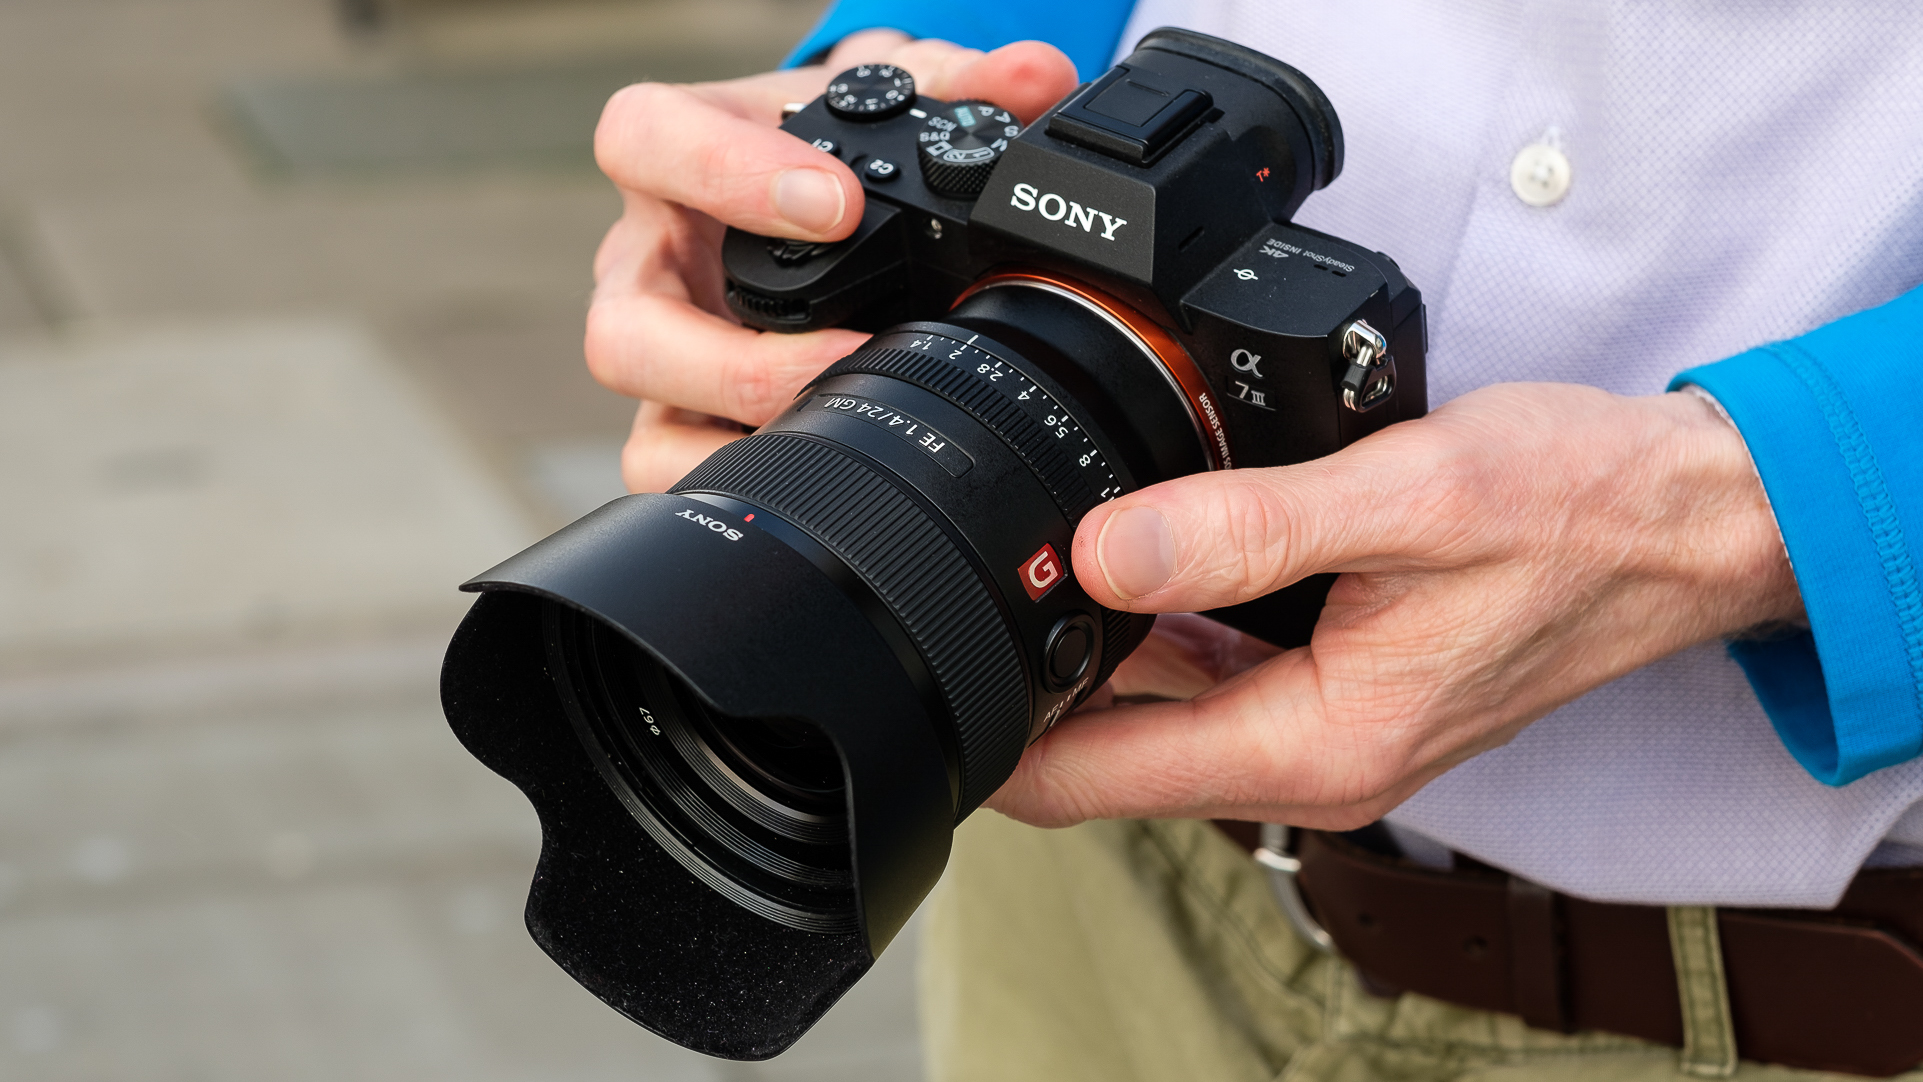 Survey shows Sony A7 III is favorite camera for pro photographers